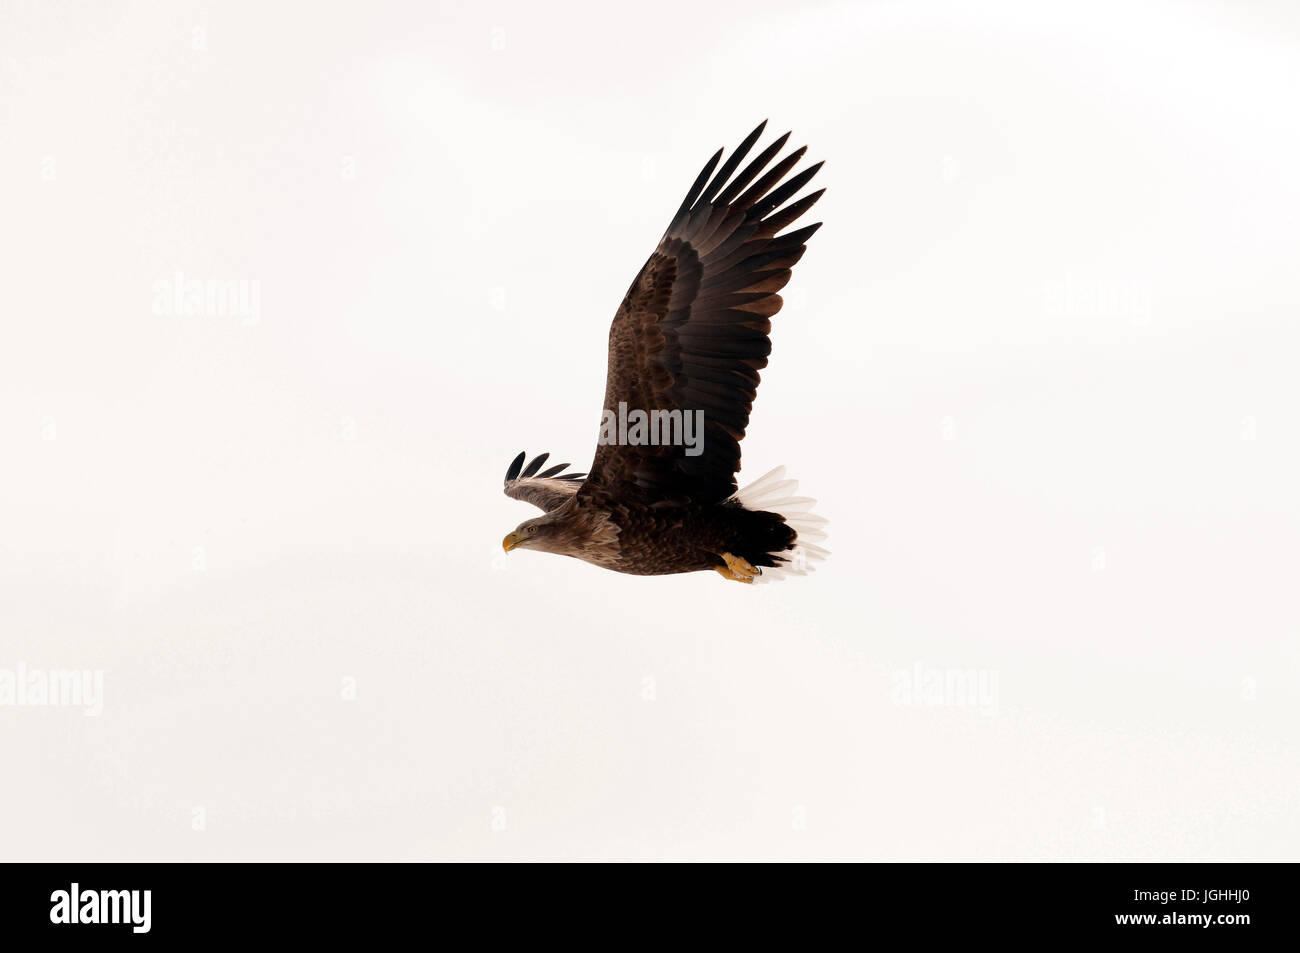 White-tailed Sea-eagle flying (Haliaeetus albicilla), Russia Eagle-rabalva, rabalva, Haliaeetus albicilla, (Pygargue à queue blanche) Russia, 2017 Stock Photo